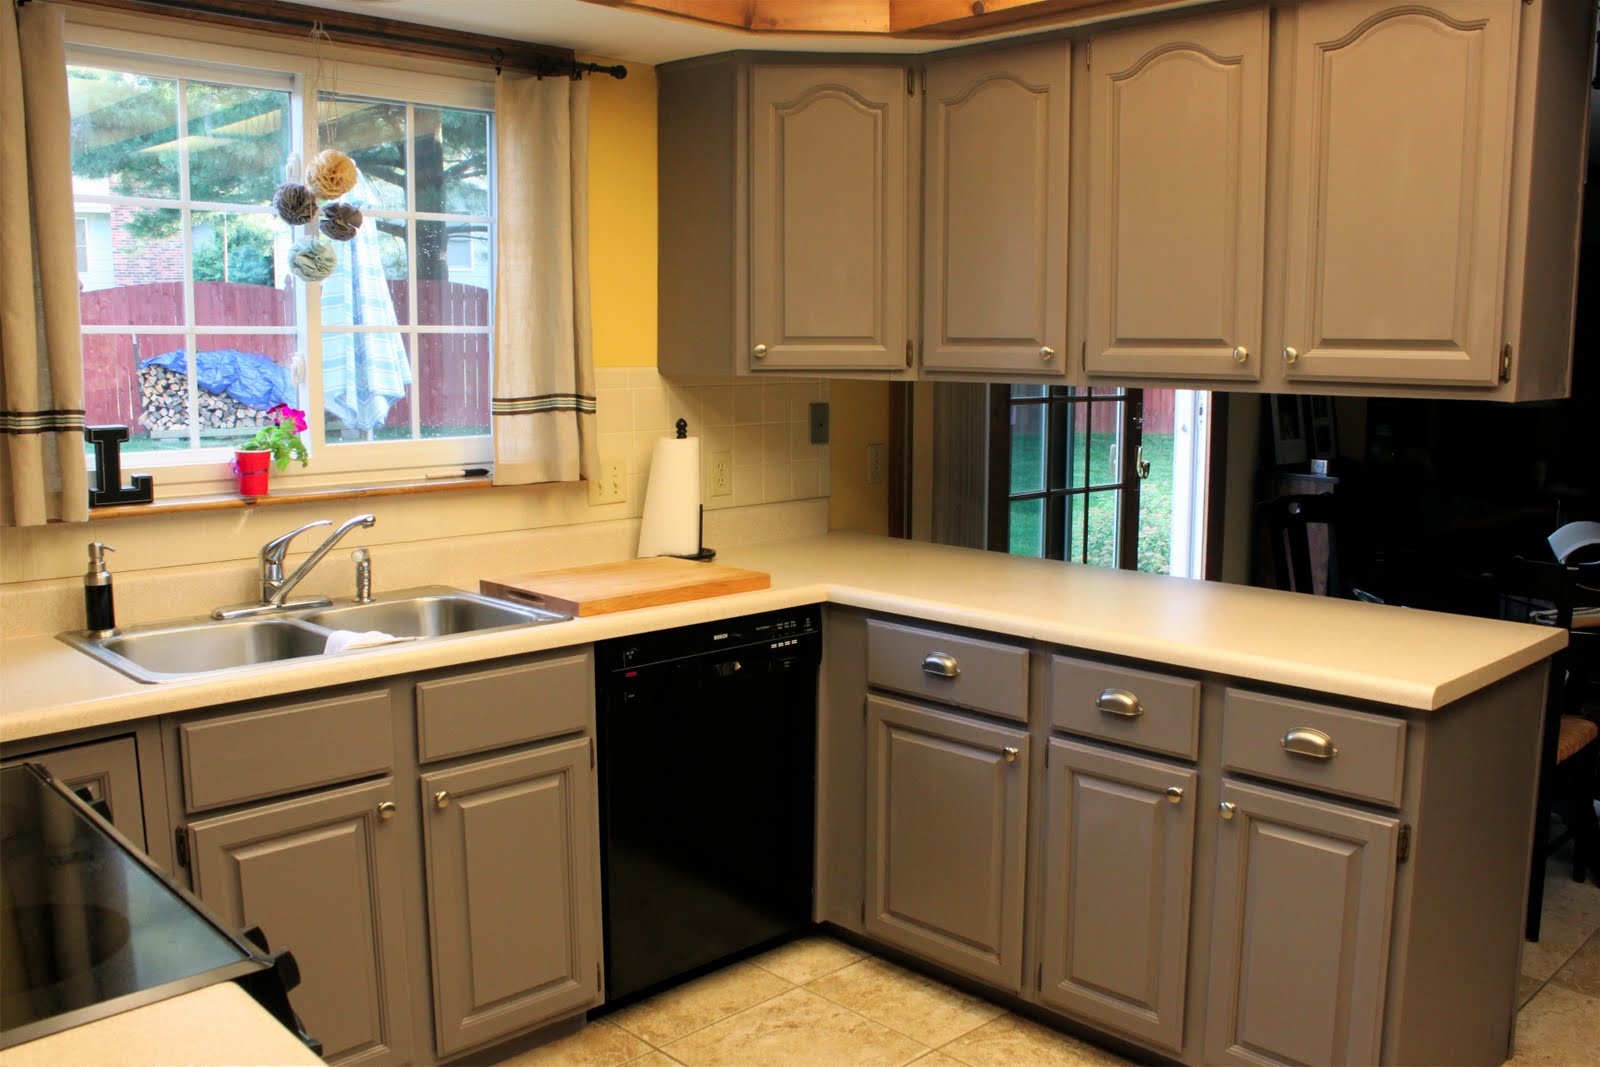 Photo of kitchen cabinets for an article about painting cabinets.